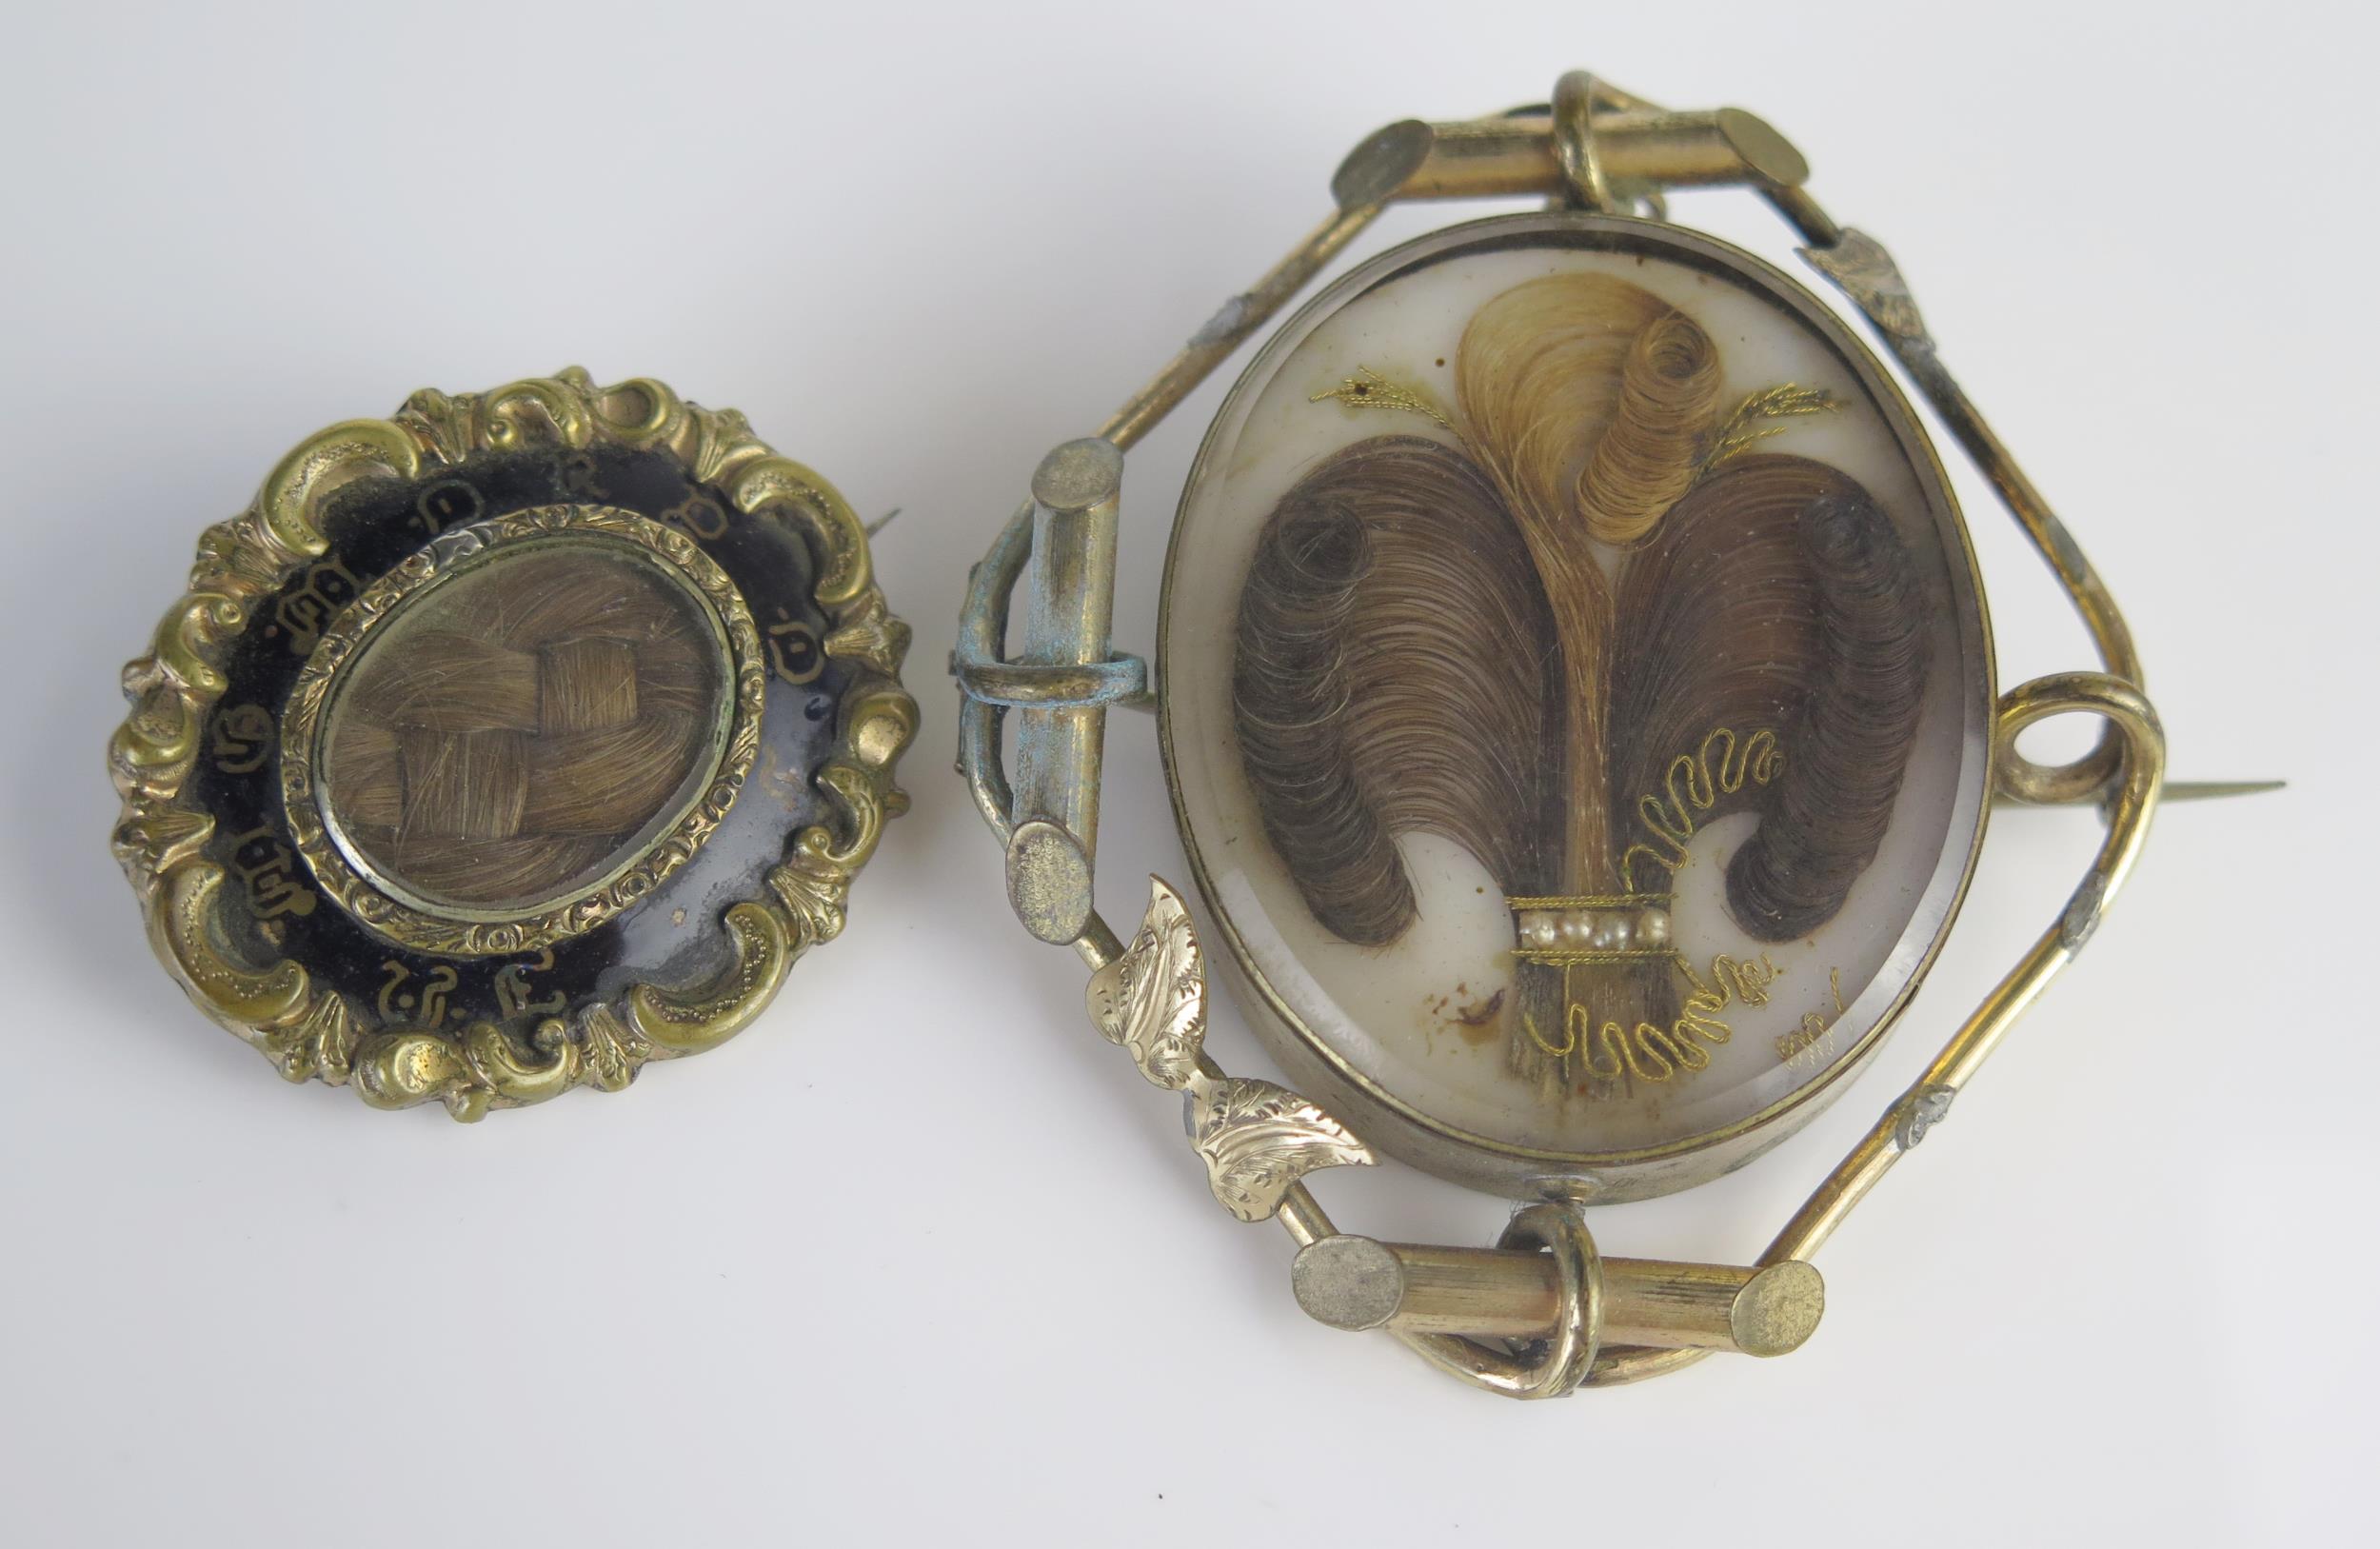 Two Victorian Memorial Brooches including one set with a plume of hair embellished with gold